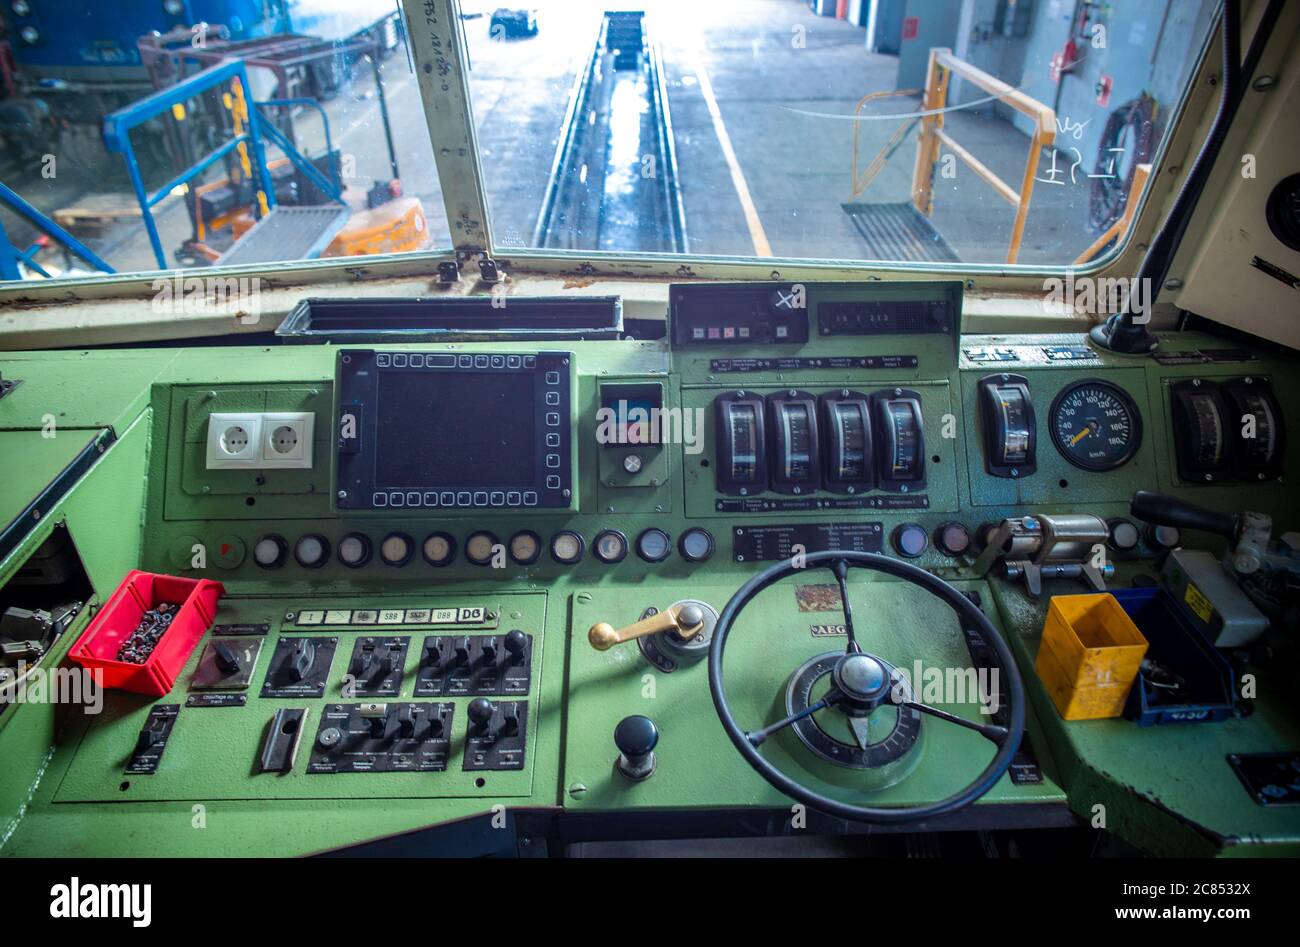 16 July 2020, Mecklenburg-Western Pomerania, Mukran: The driver's cab of the class 181 electric locomotive built in 1972 in the repair shop of Baltic Port Services GmbH (BPS). Several of the locomotives built from a small series at Krupp in Essen and AEG in Berlin, eight of the once 29 of these electric locomotives still exist today, are being repaired for the company Schlünß Eisenbahn Logistik (SEL) from near Neumünster in Schleswig-Holstein. In the workshop opened by the Deutsche Reichsbahn in 1986, rail vehicles coming from the railway ferry were re-gauged from the 1520 millimetre wide Russ Stock Photo